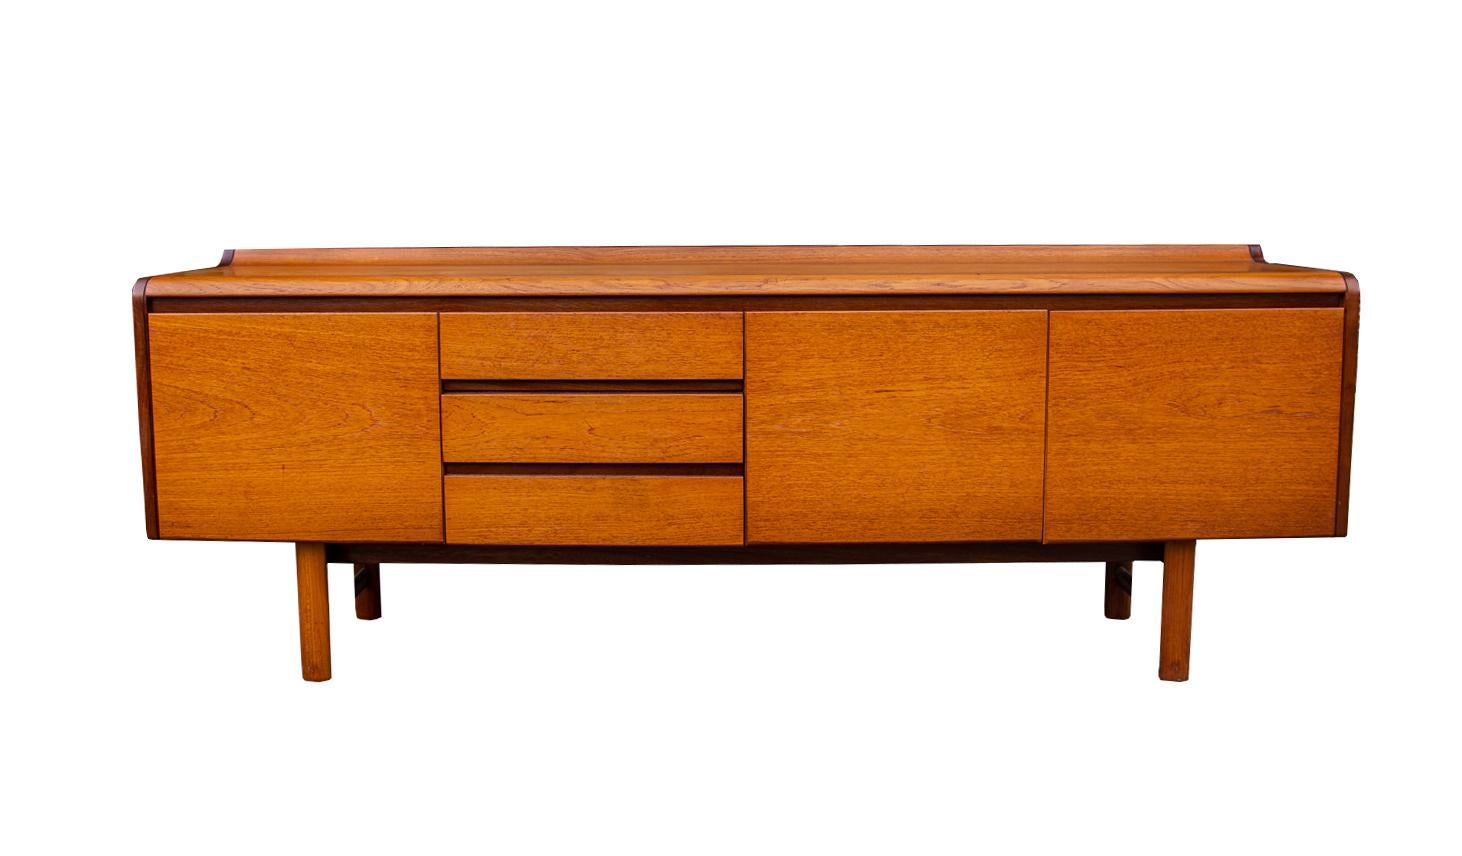 Beautiful joinery in a wonderfully grained and patinated teak. Ideal mellowed cognac colouration. Timeless chic minimal lines and proportions with flush facing doors and drawers. The top back section with a swooping uplift to the form.  Excellent